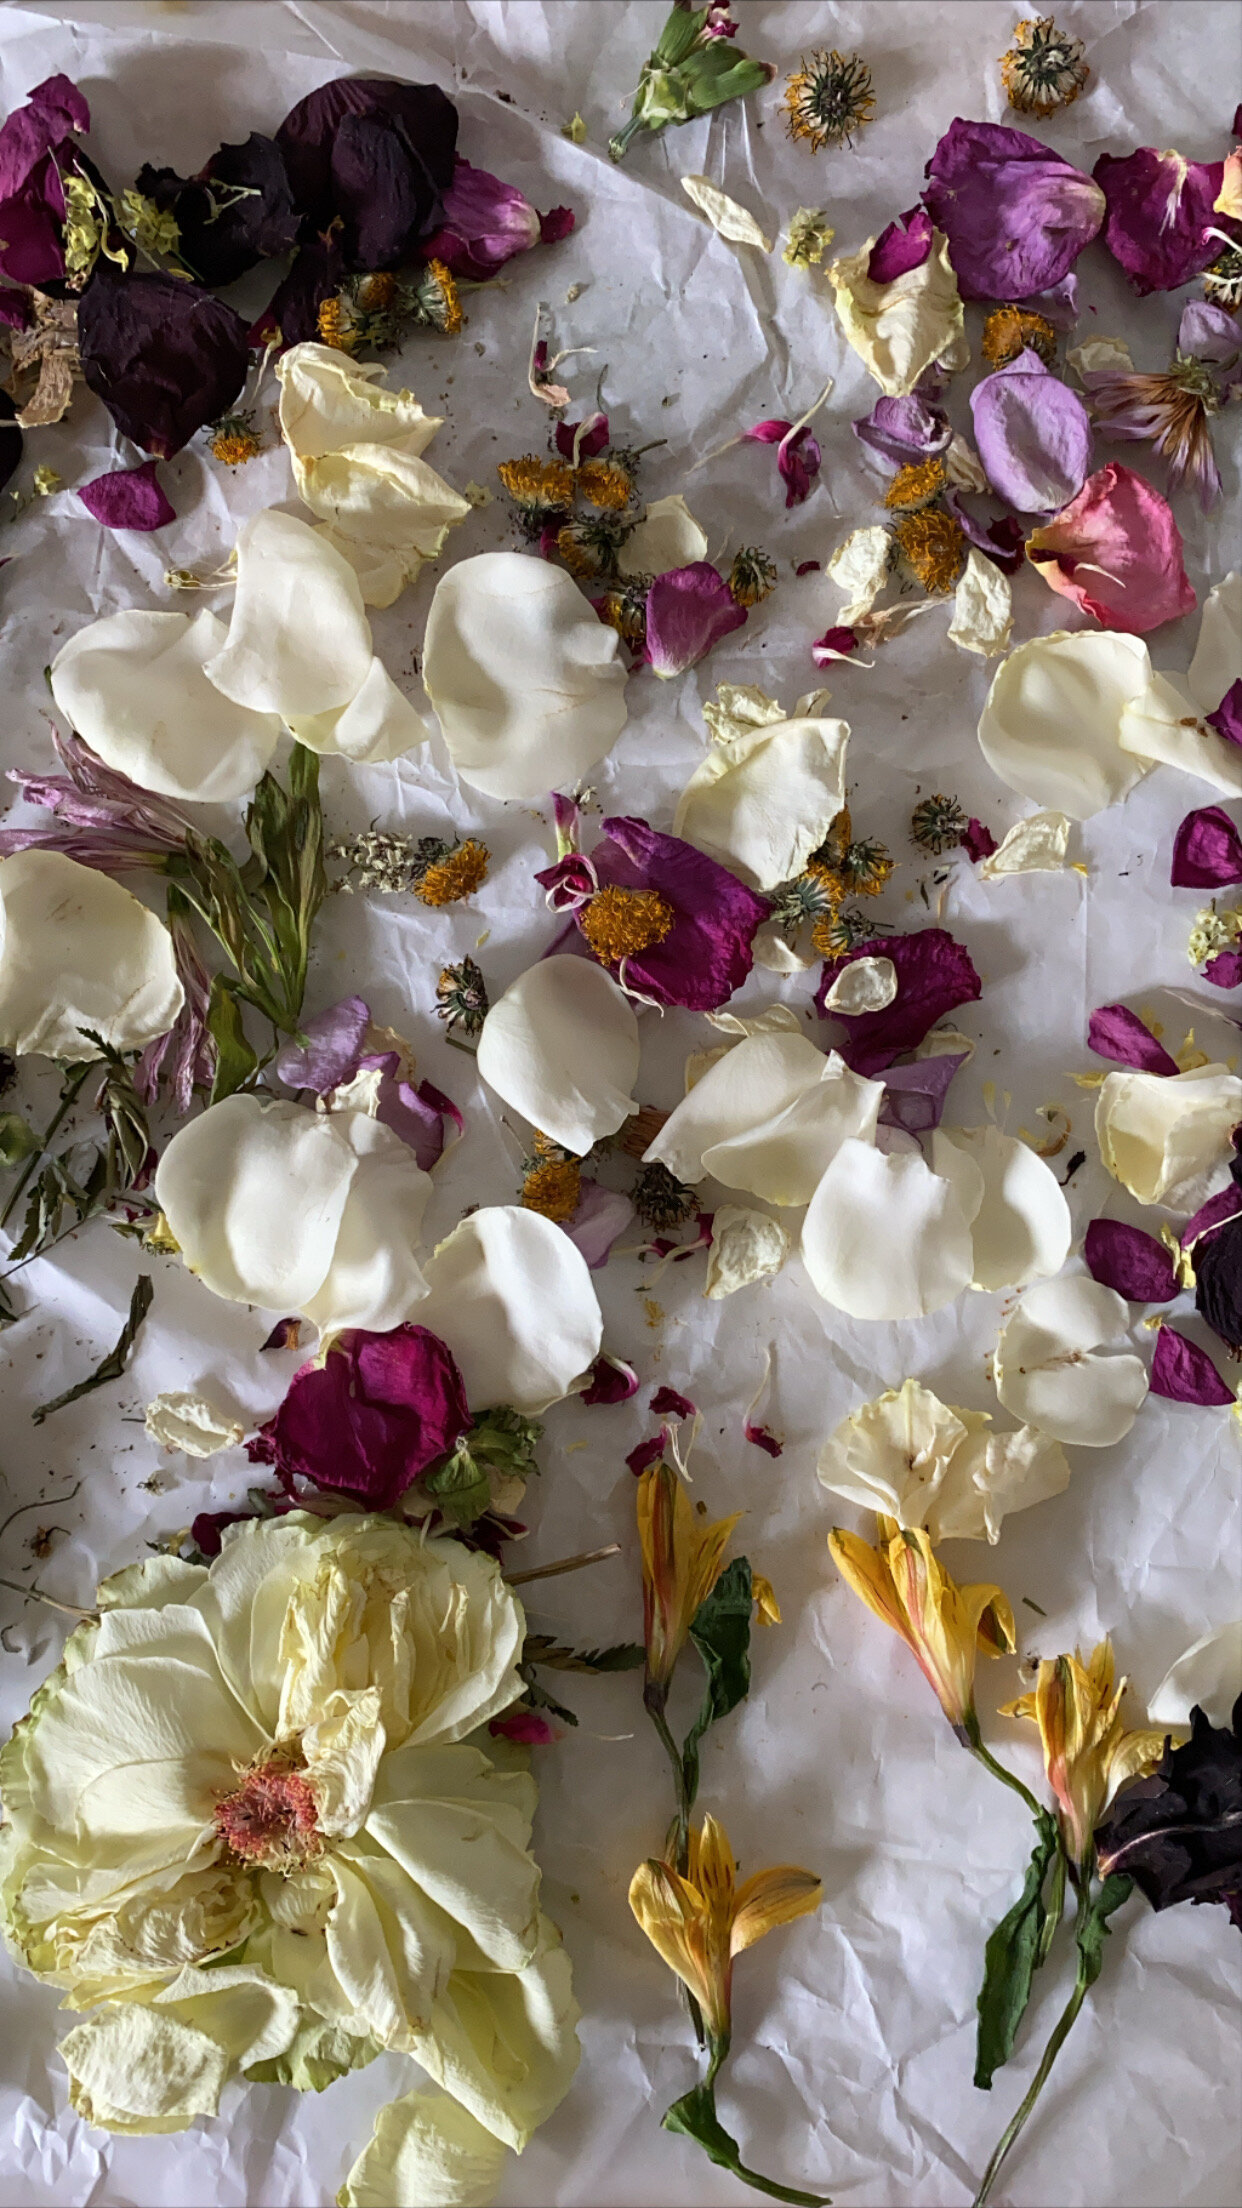 How to Start a Dried Flower Business